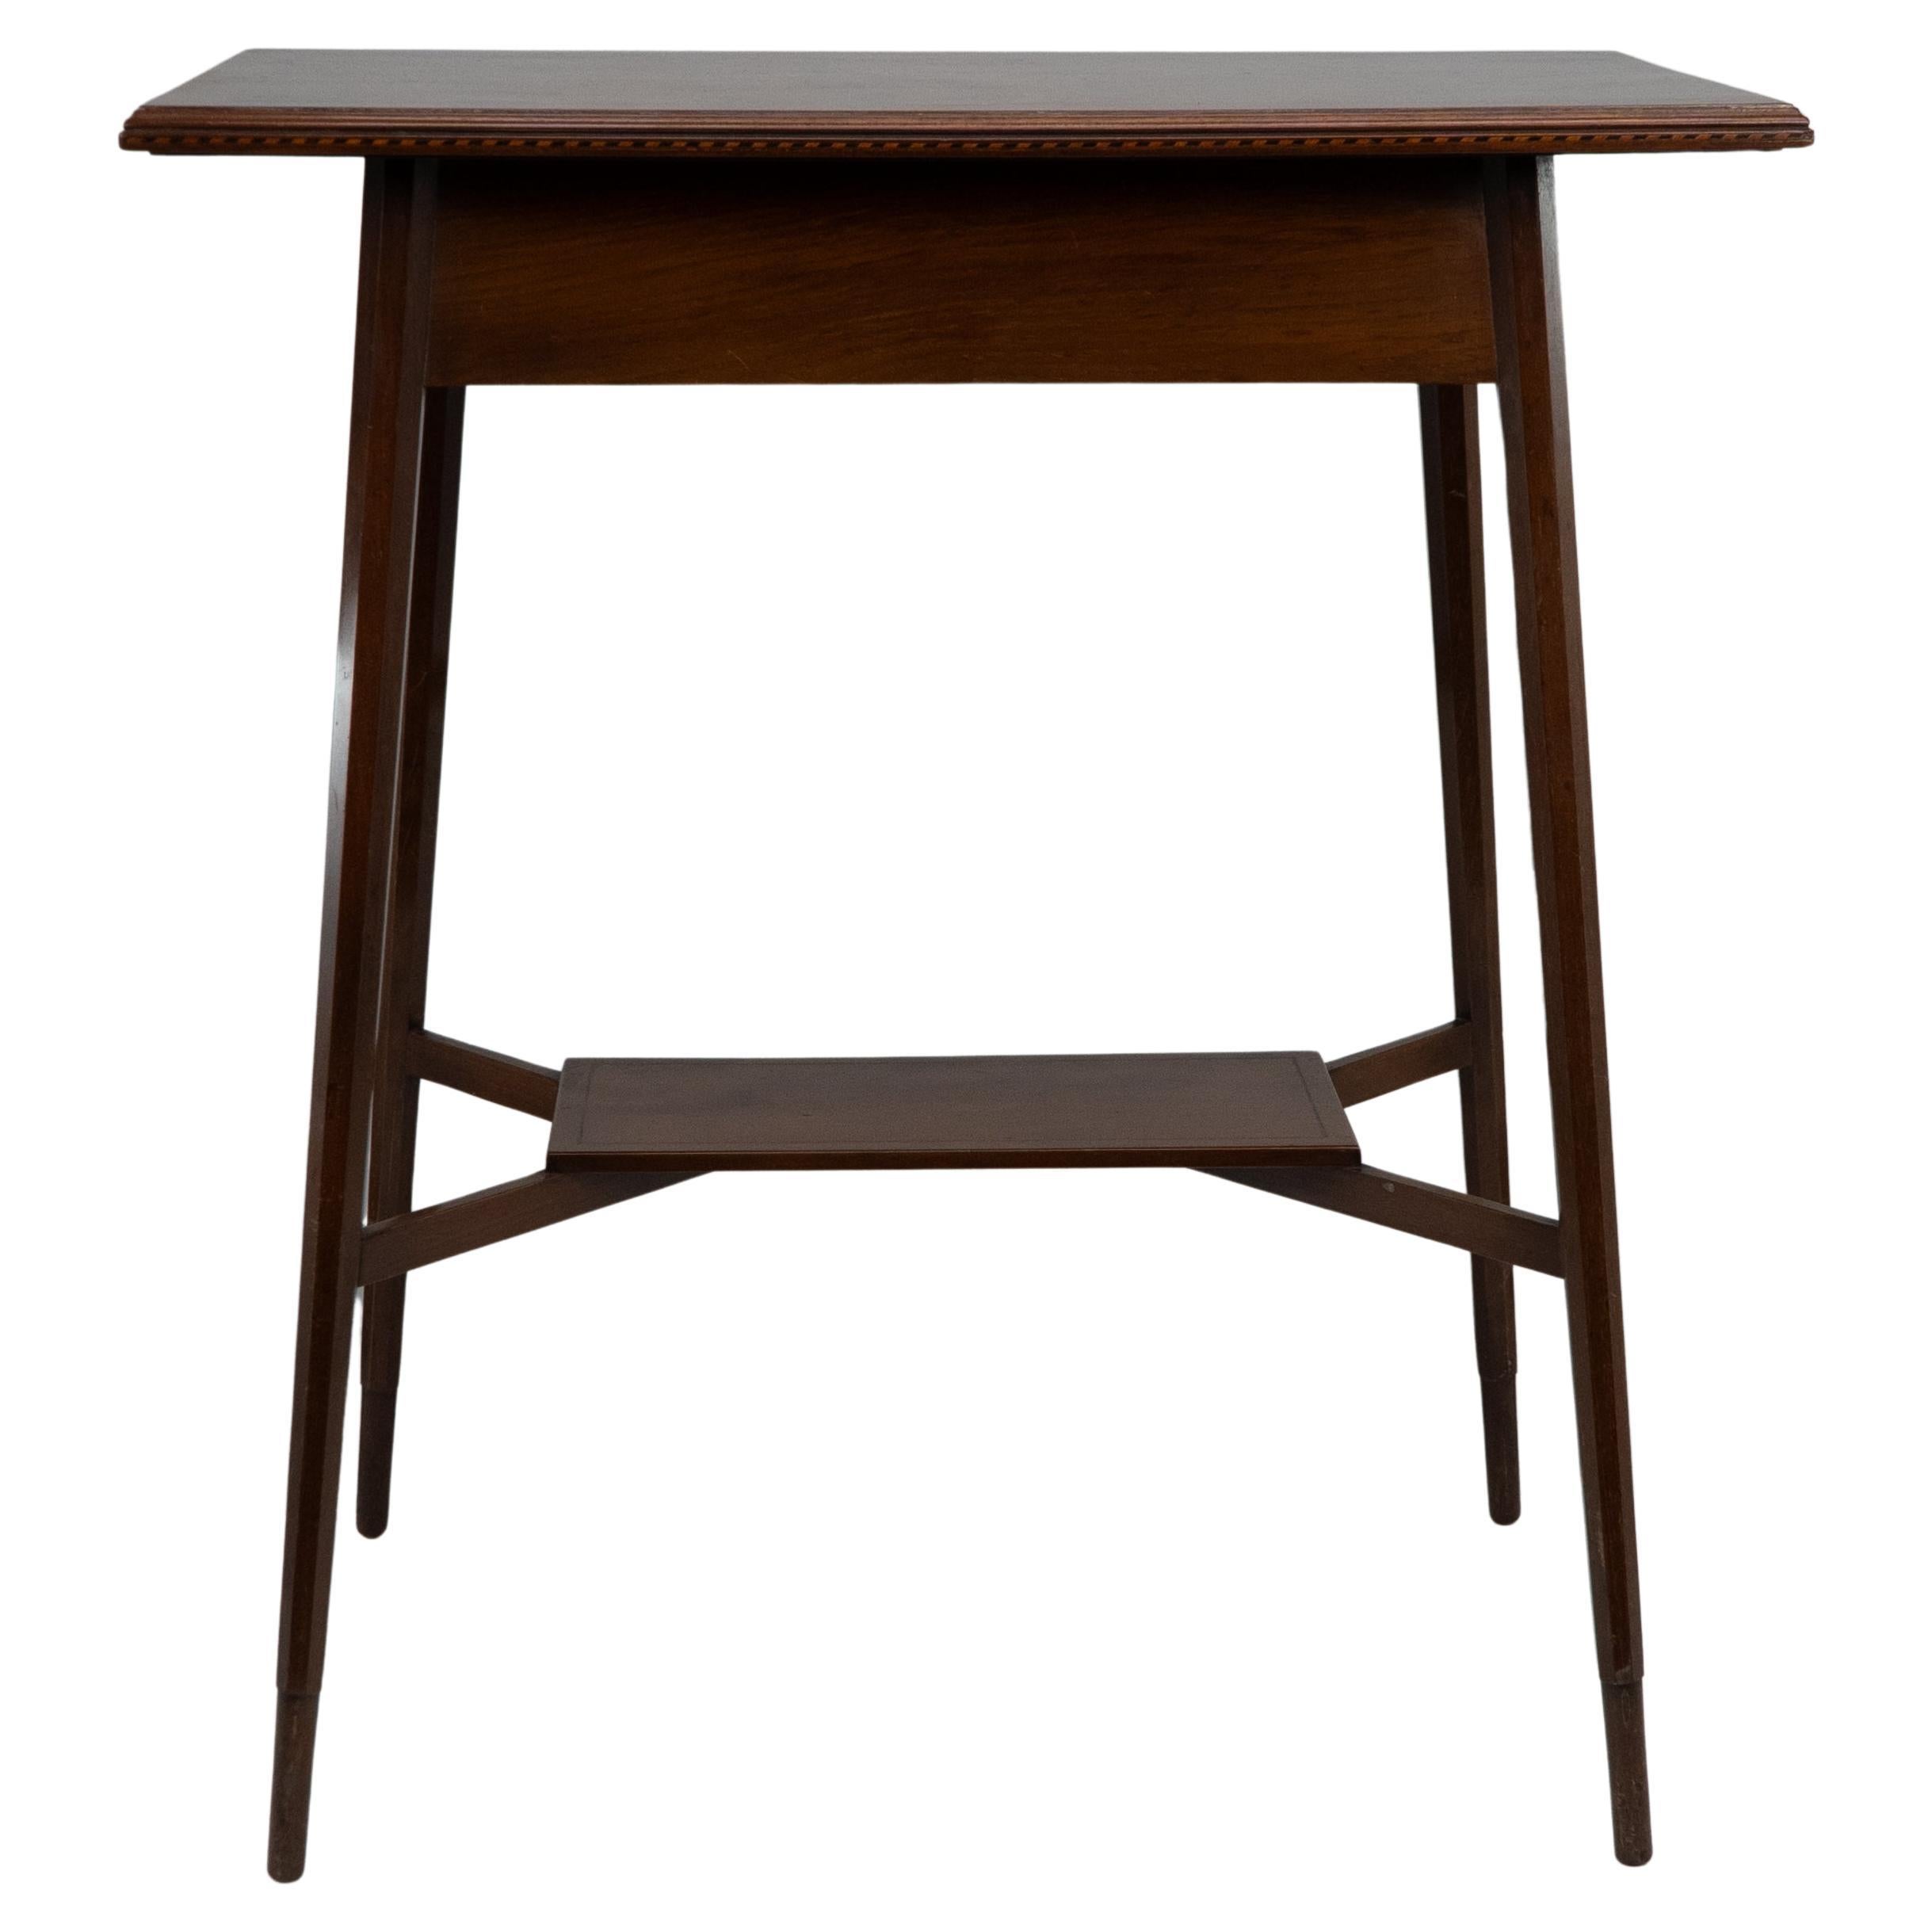 Morris & Co. A fine quality Aesthetic Movement walnut side table. For Sale